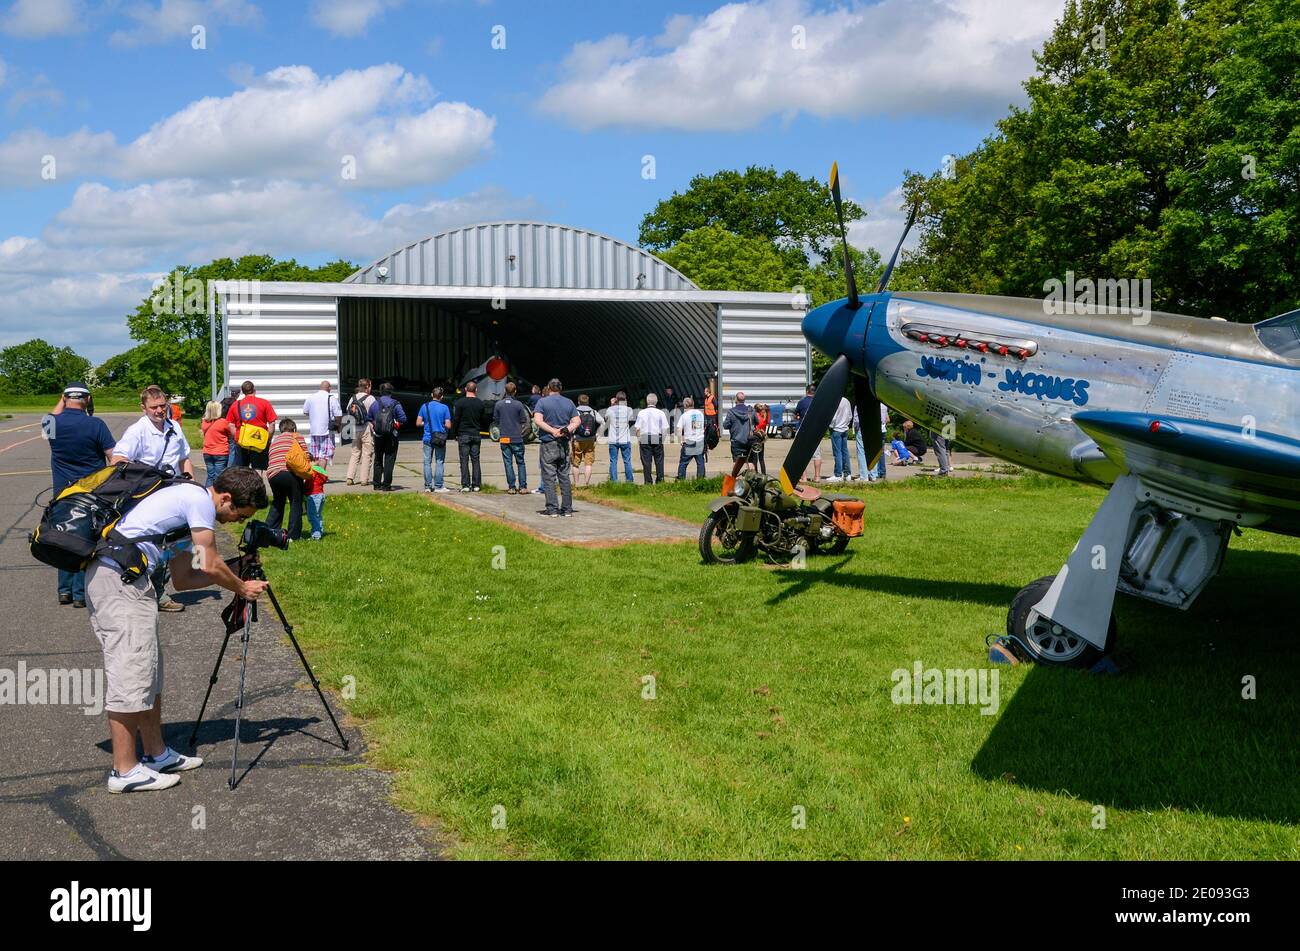 North American P-51D Mustang Second World War fighter at North Weald airfield, Essex, UK. Owned by Peter Teichman of Hangar 11. Photographers event Stock Photo